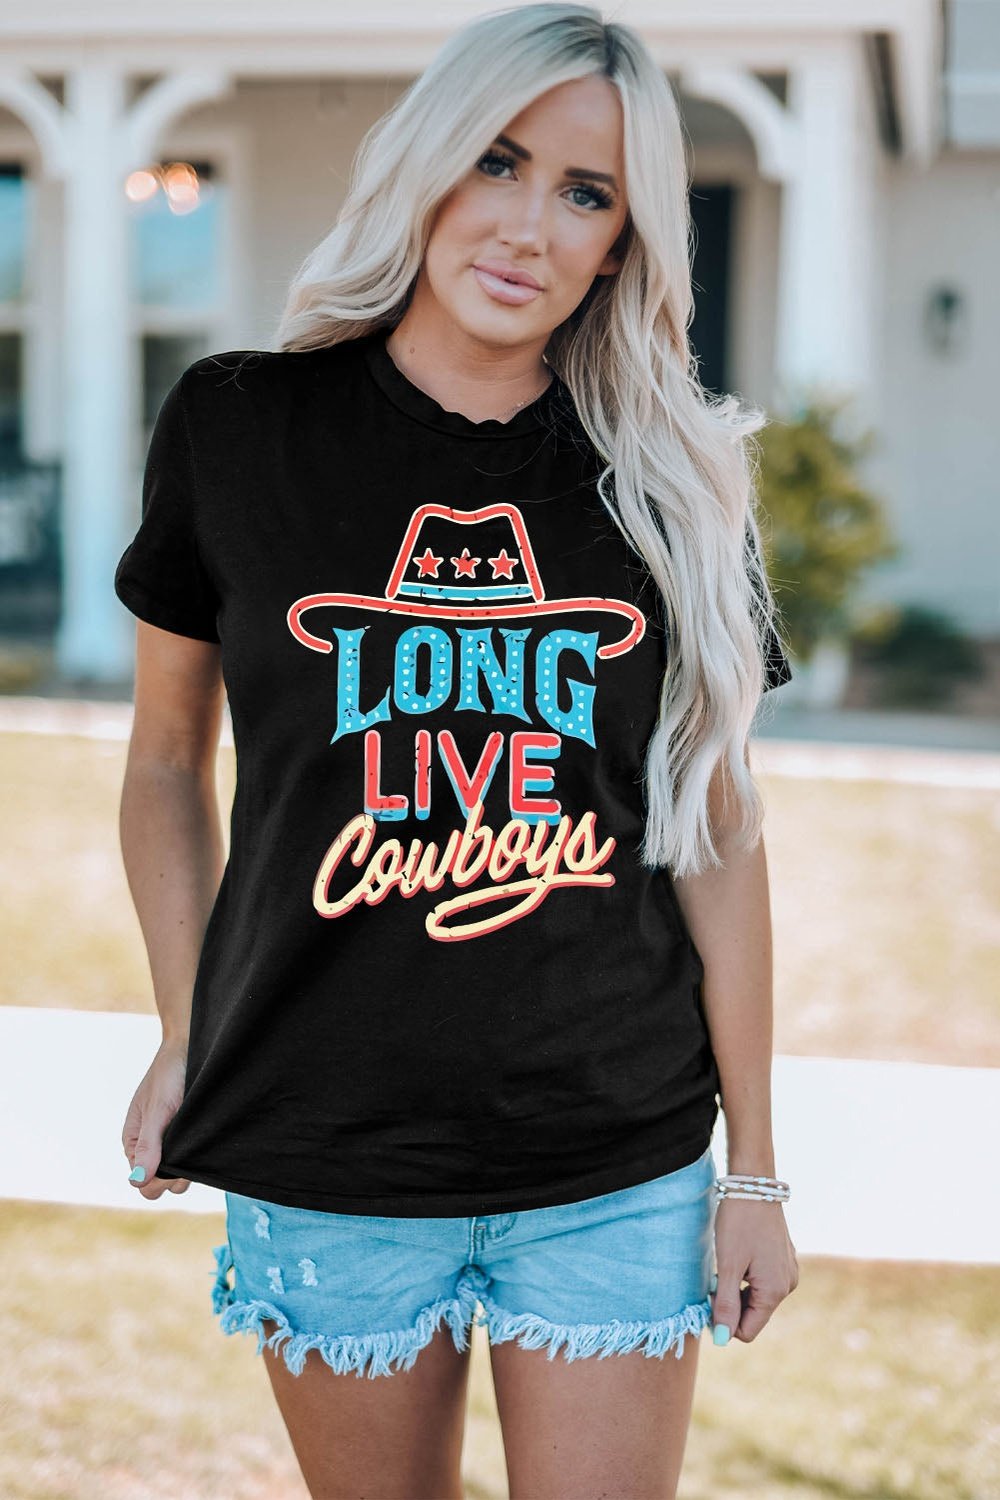 LONG LIVE COWBOYS Graphic Tee Shirt - T-Shirts - FITGGINS